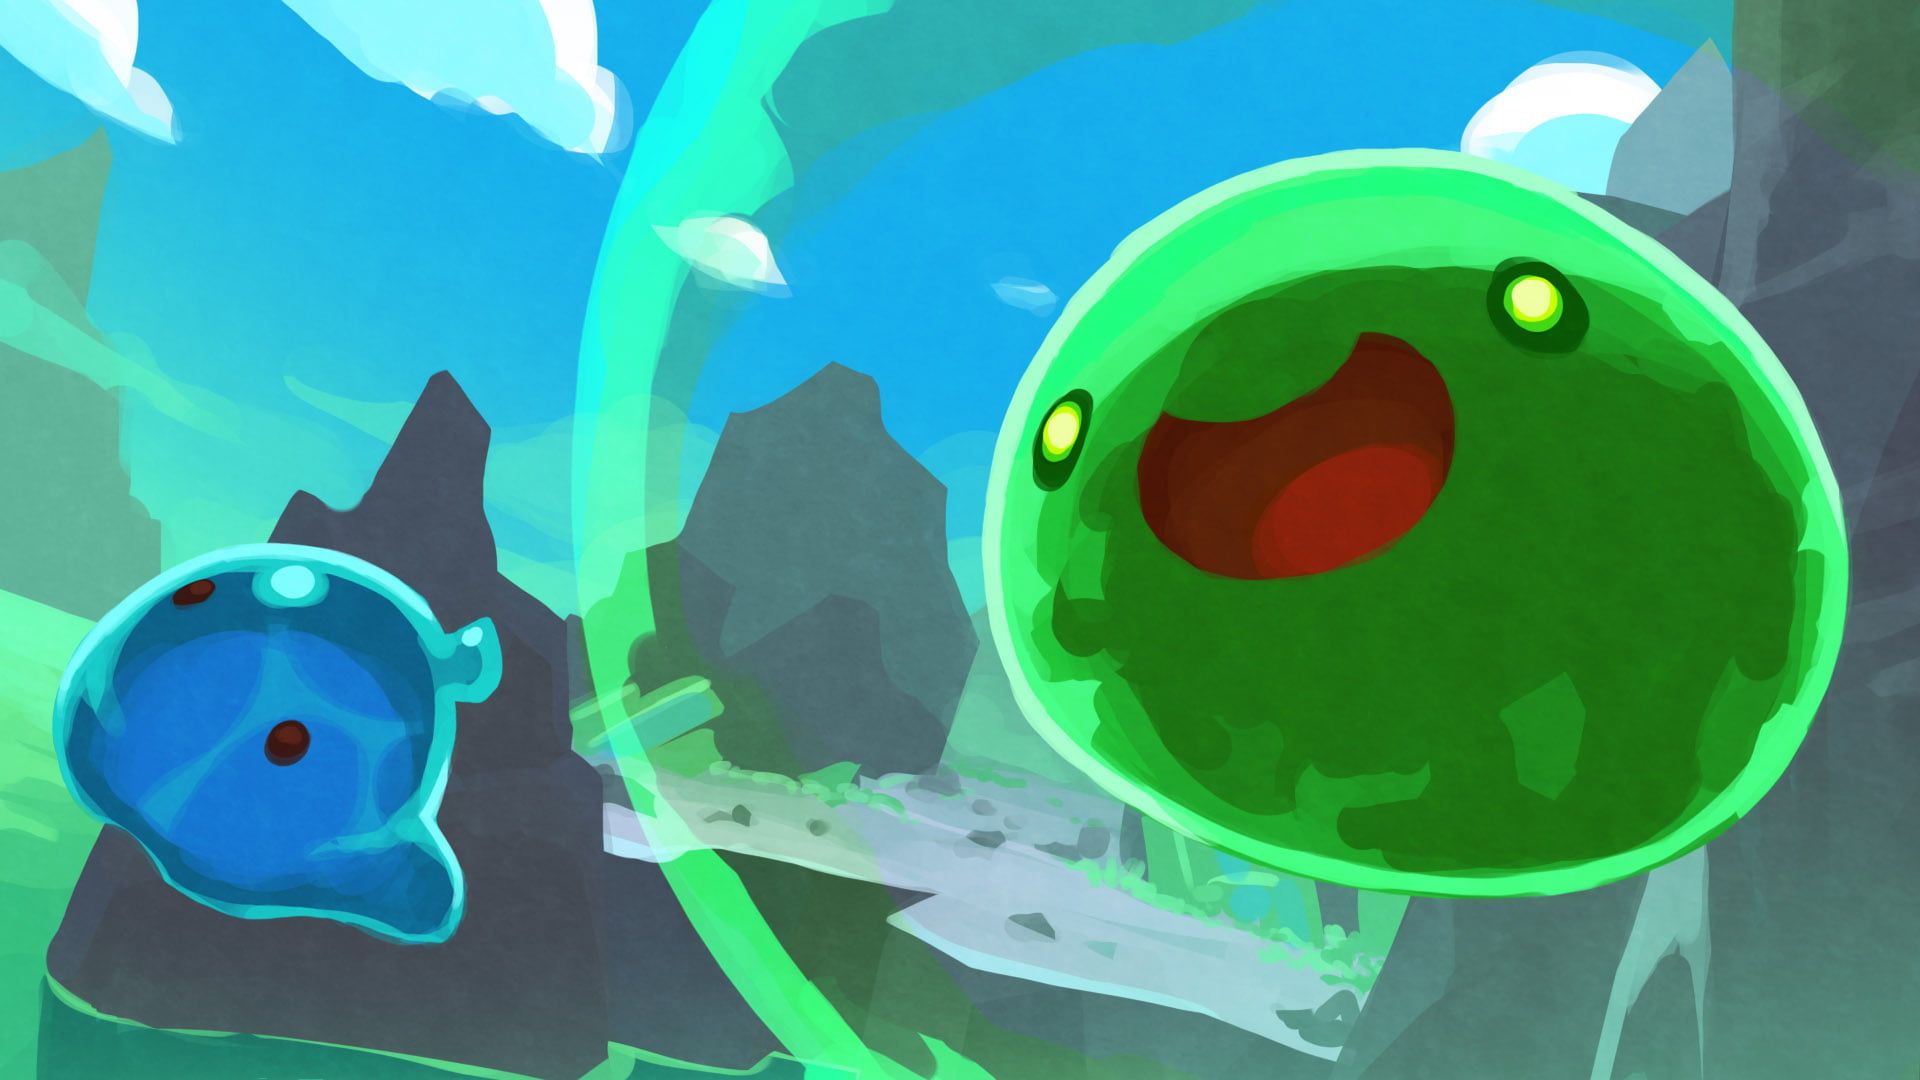 A screenshot of a green, red-eyed creature with a smile on its face, surrounded by a green mist. - Slime Rancher